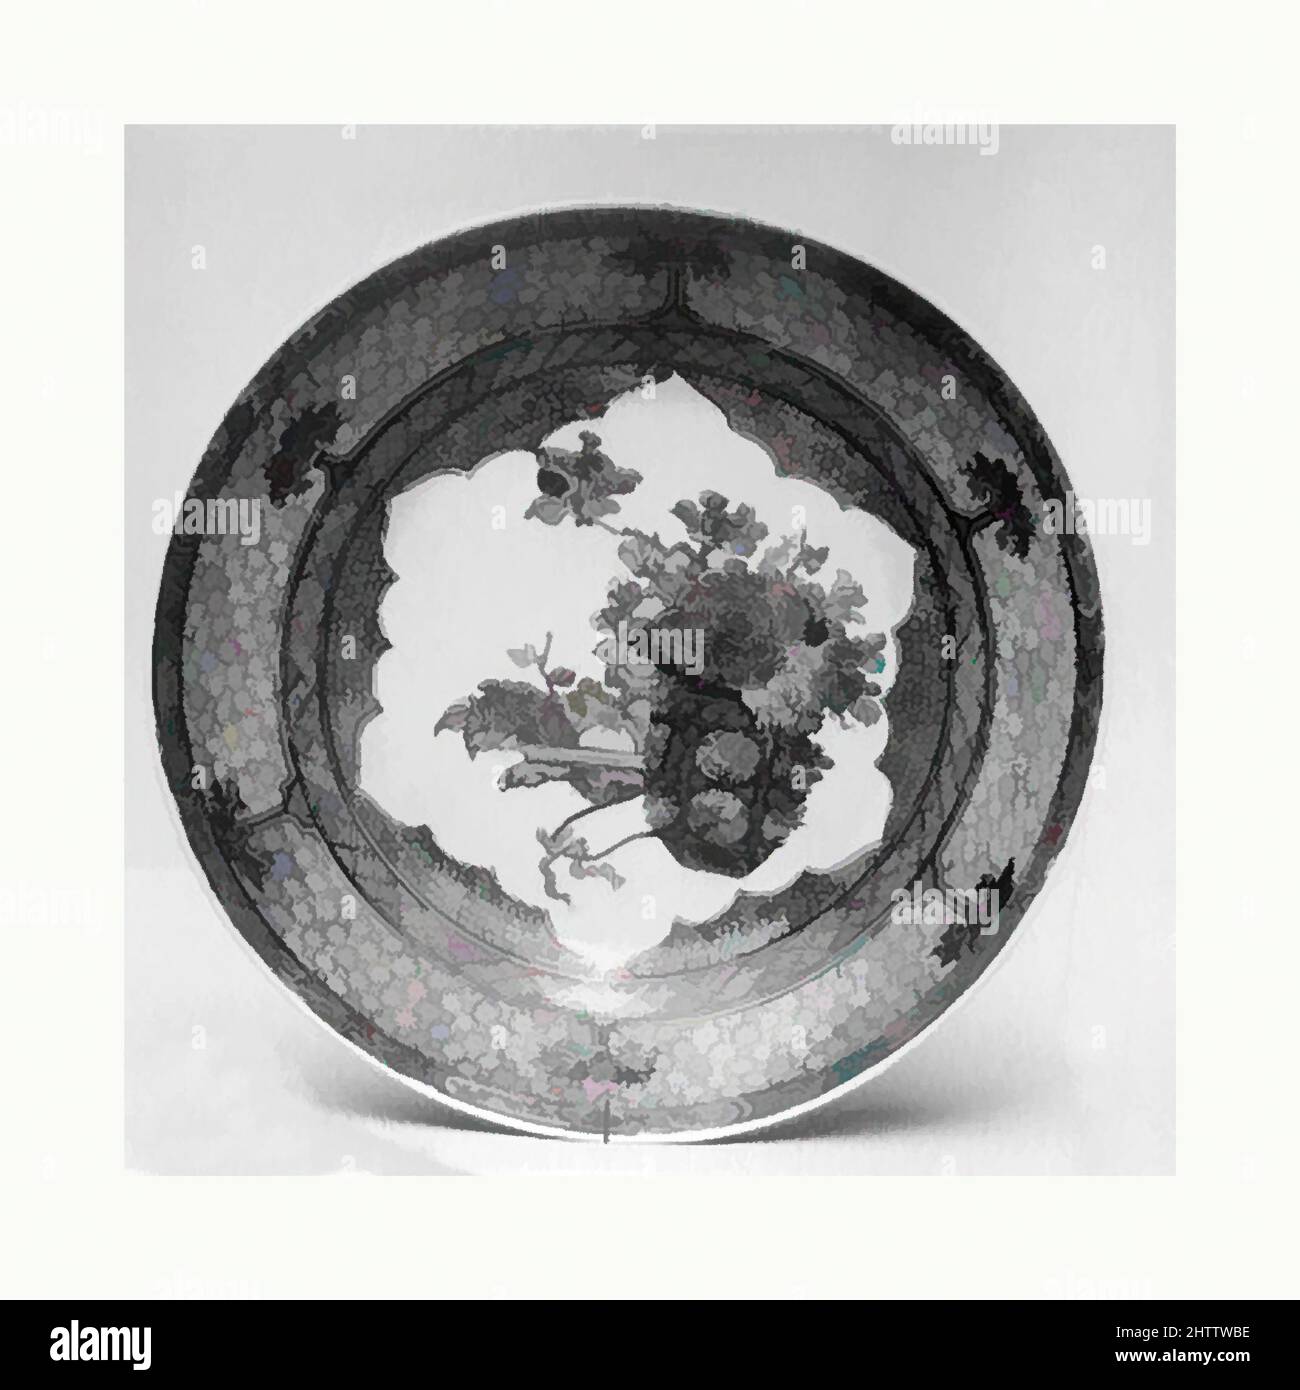 Art inspired by Plate, Qing dynasty (1644–1911), Qianlong period (1736–95), China, Porcelain, Diam. 6 1/4 in. (15.9 cm), Ceramics, Classic works modernized by Artotop with a splash of modernity. Shapes, color and value, eye-catching visual impact on art. Emotions through freedom of artworks in a contemporary way. A timeless message pursuing a wildly creative new direction. Artists turning to the digital medium and creating the Artotop NFT Stock Photo